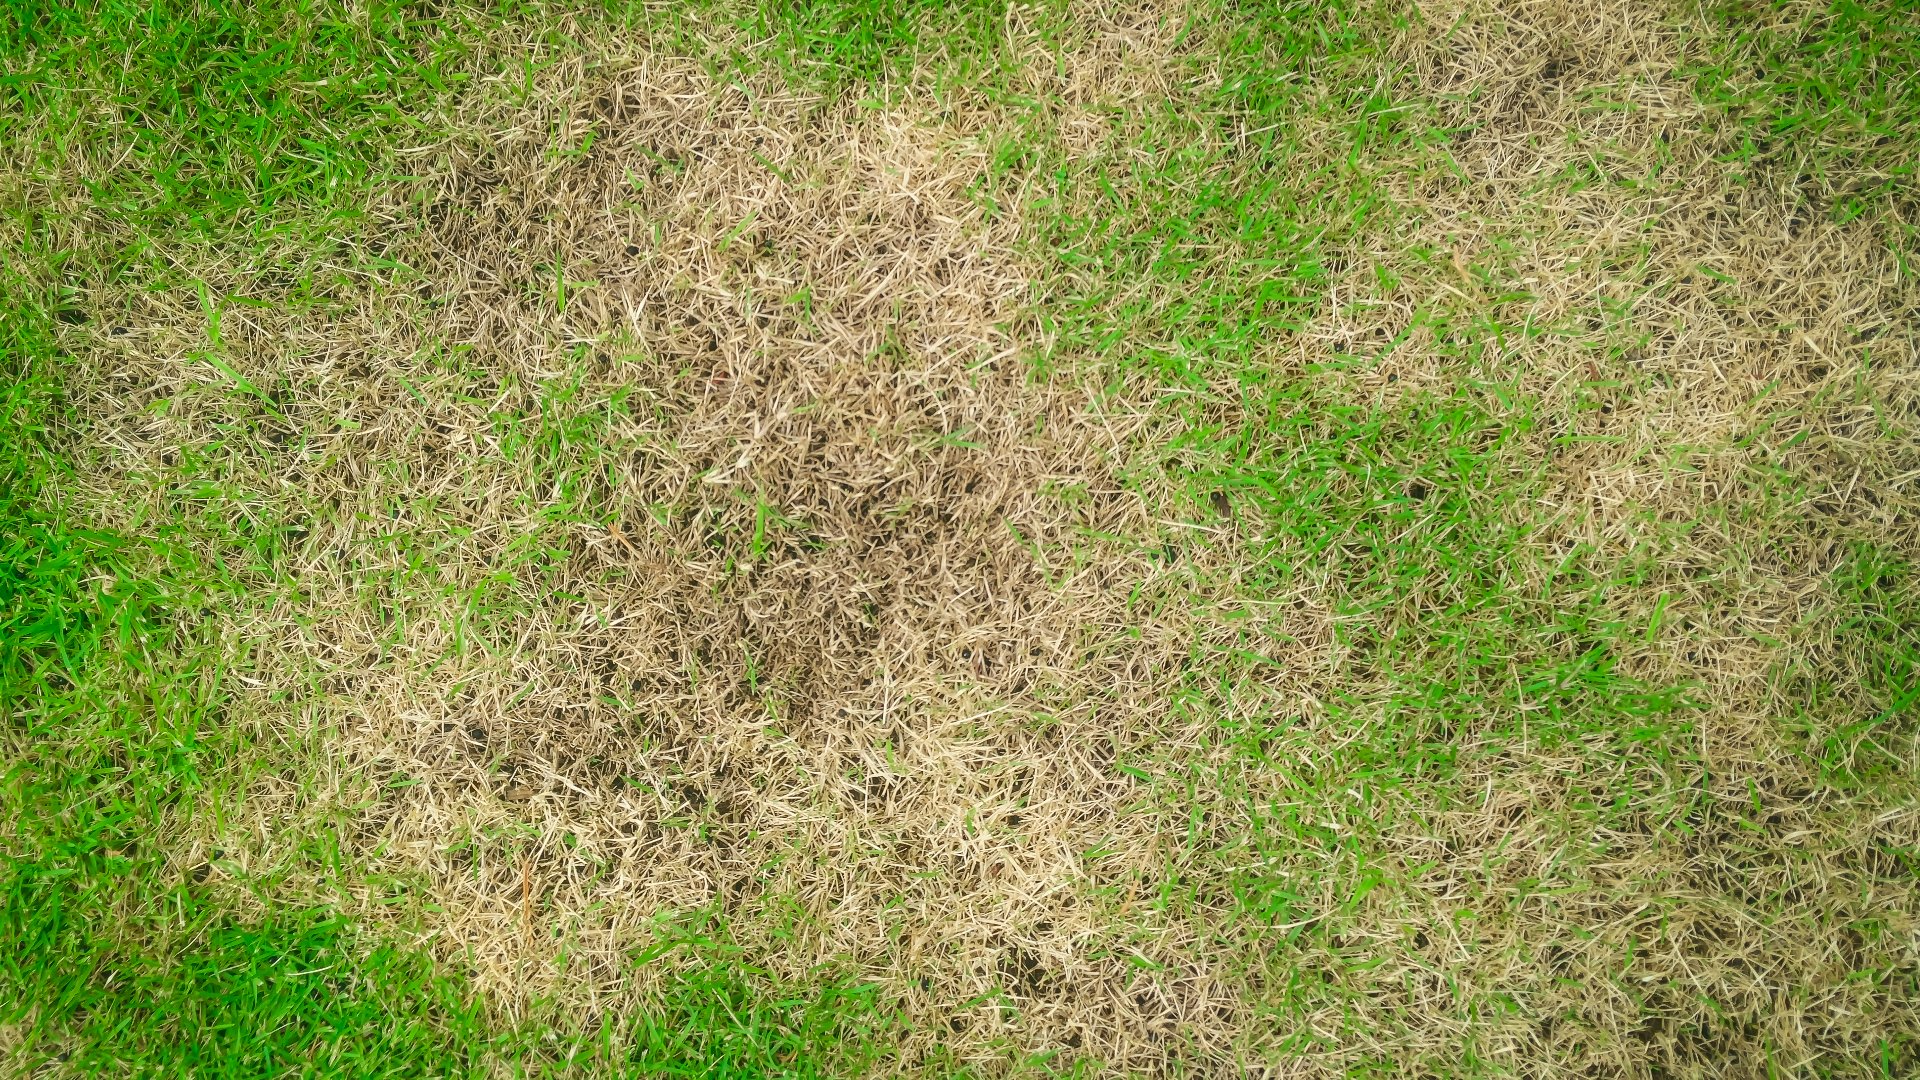 Everything You Need to Know About Leaf Blight - A Lawn Disease in Minnesota